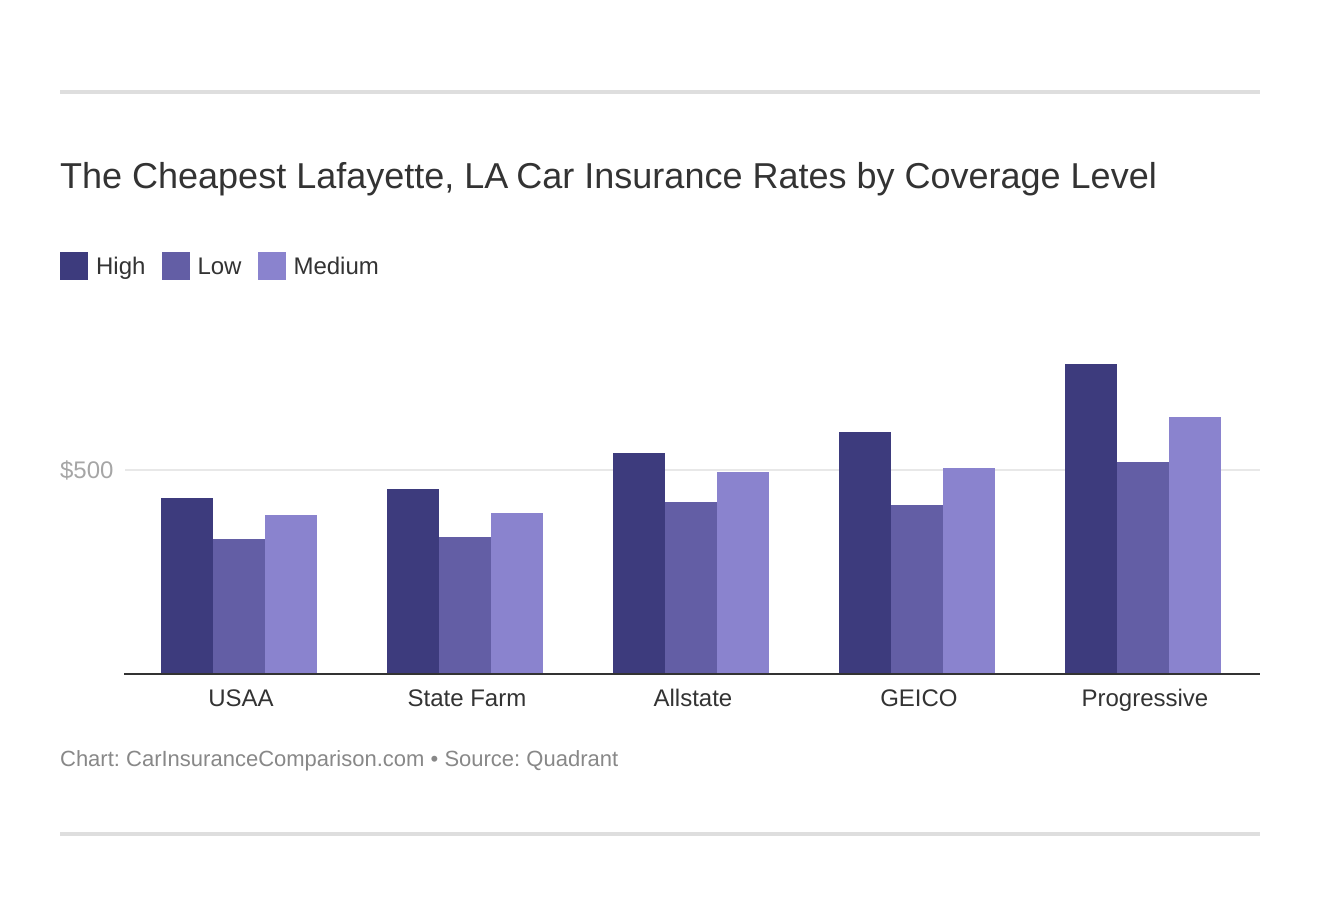 The Cheapest Lafayette, LA Car Insurance Rates by Coverage Level